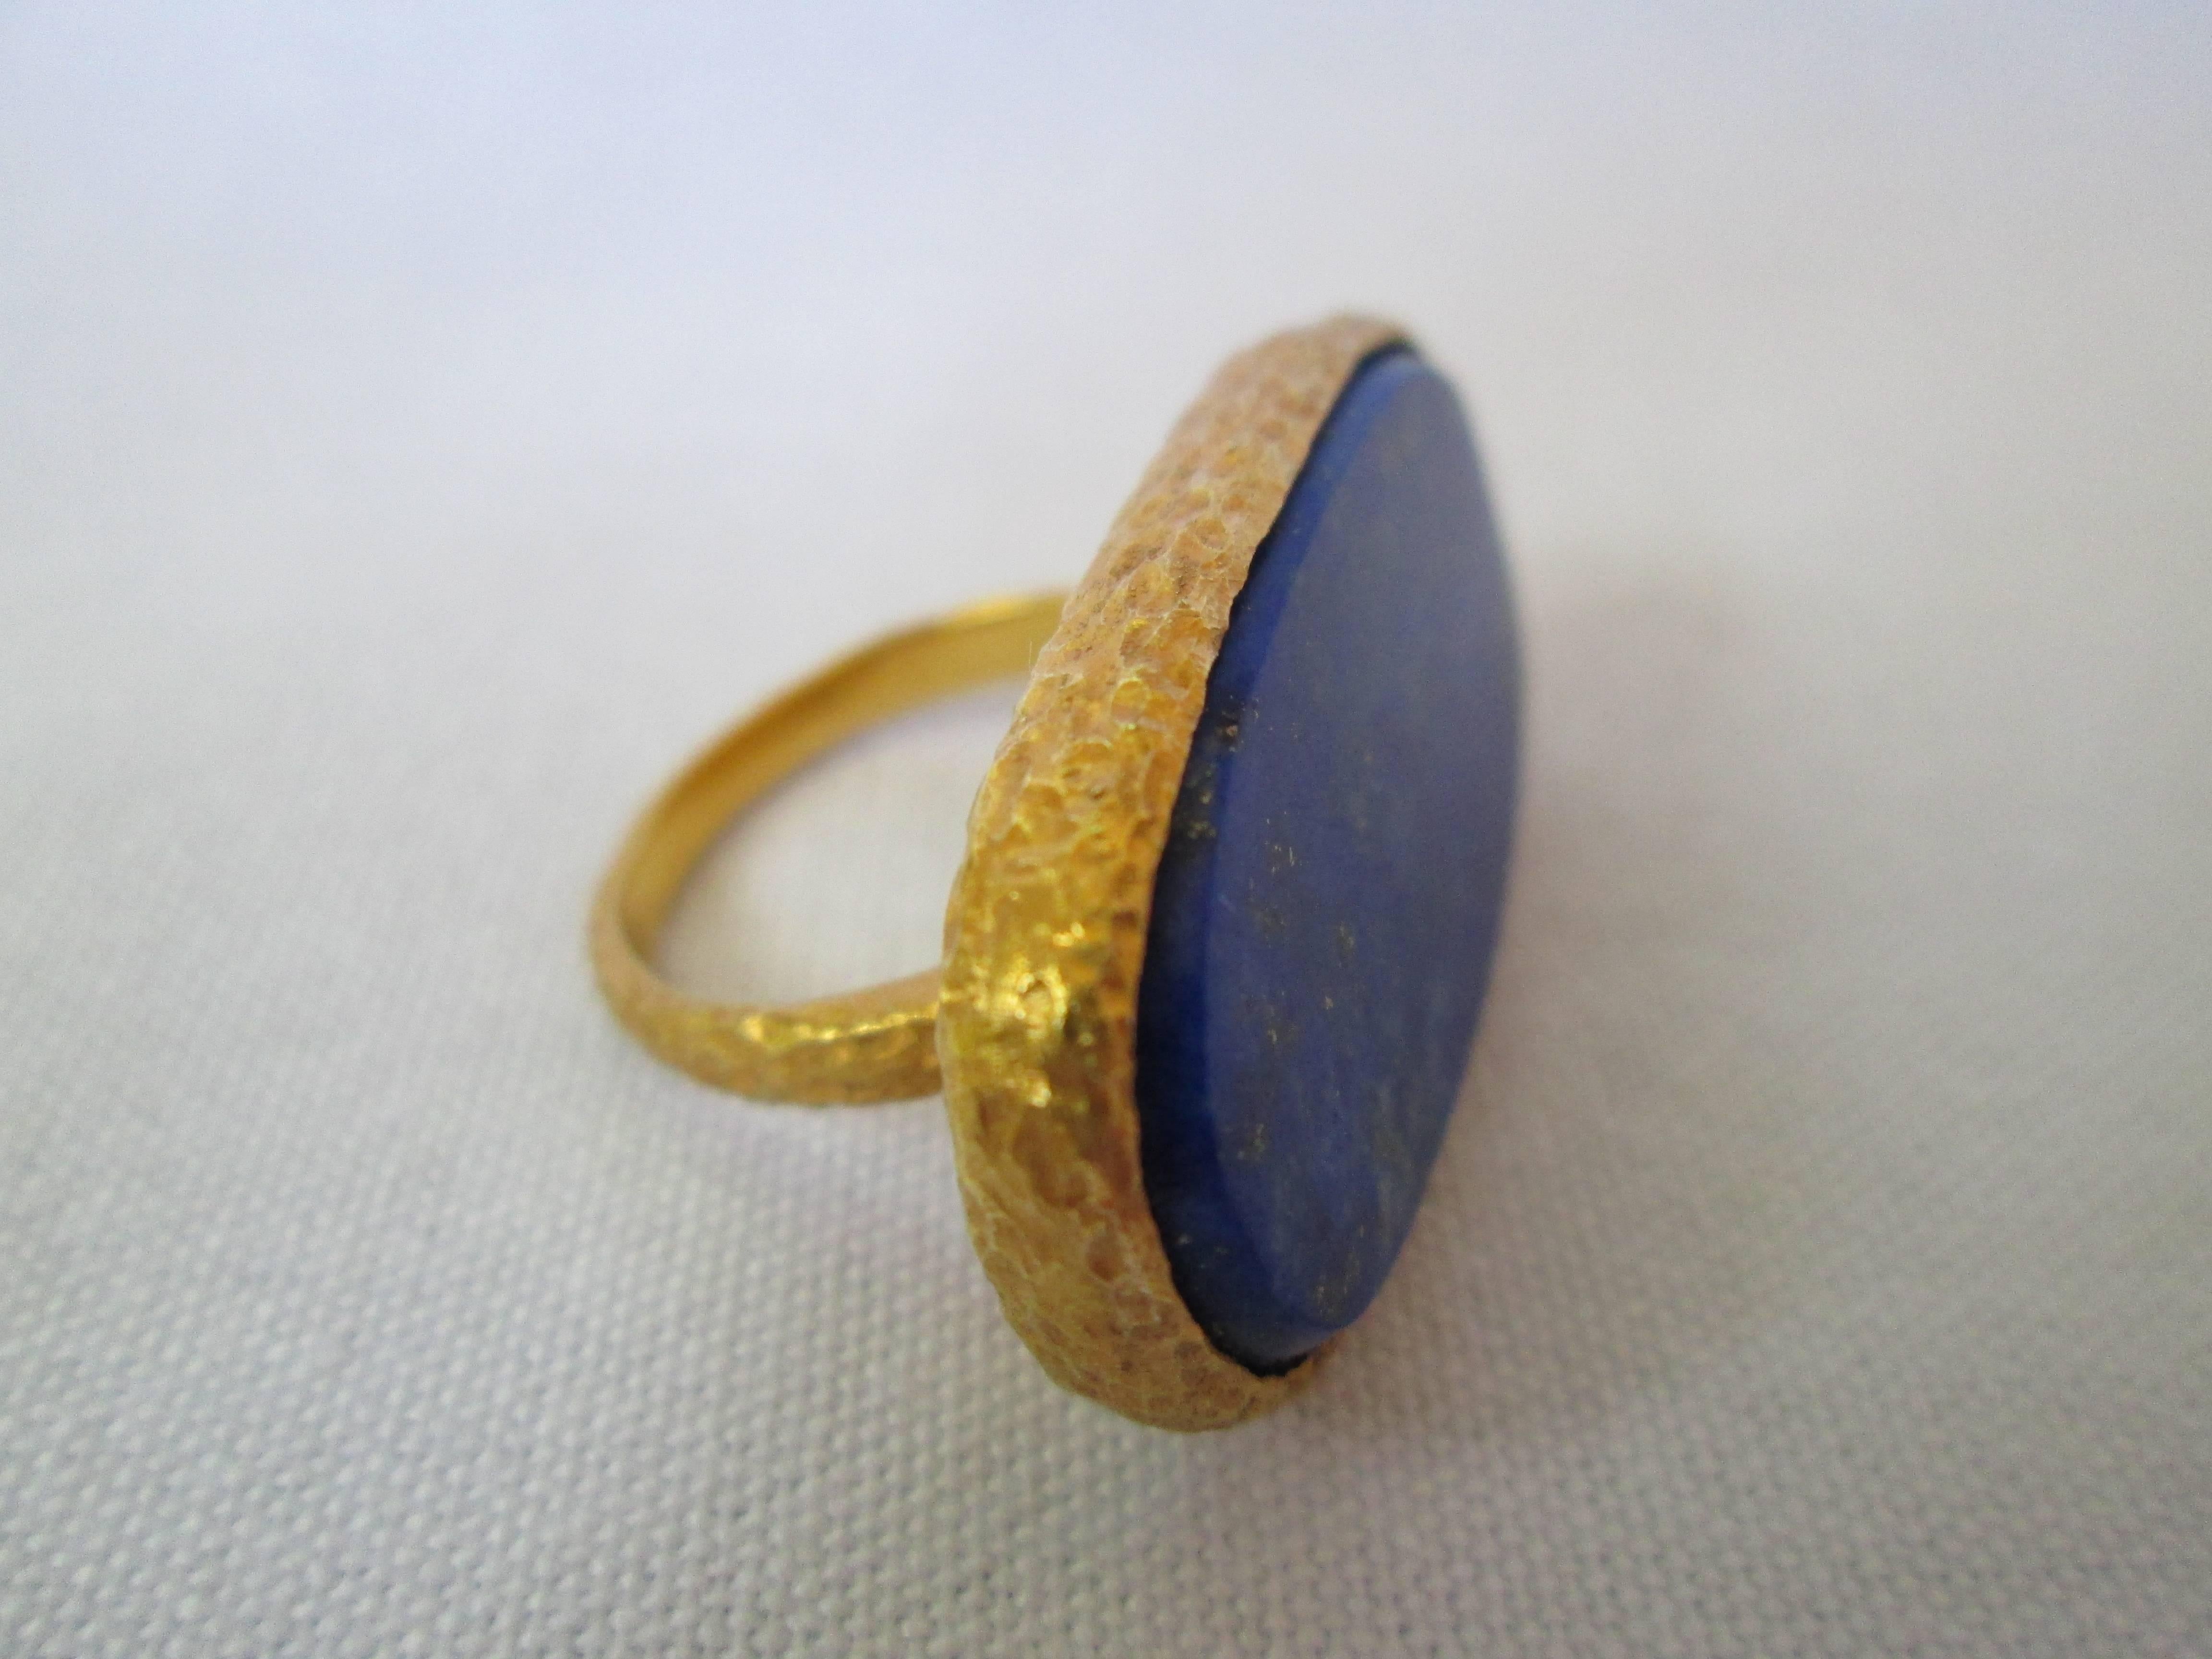 Greek Revival Large Oval Lapis Lazuli Stone In Hand Hammered Gold Ring By Marina J. 2016